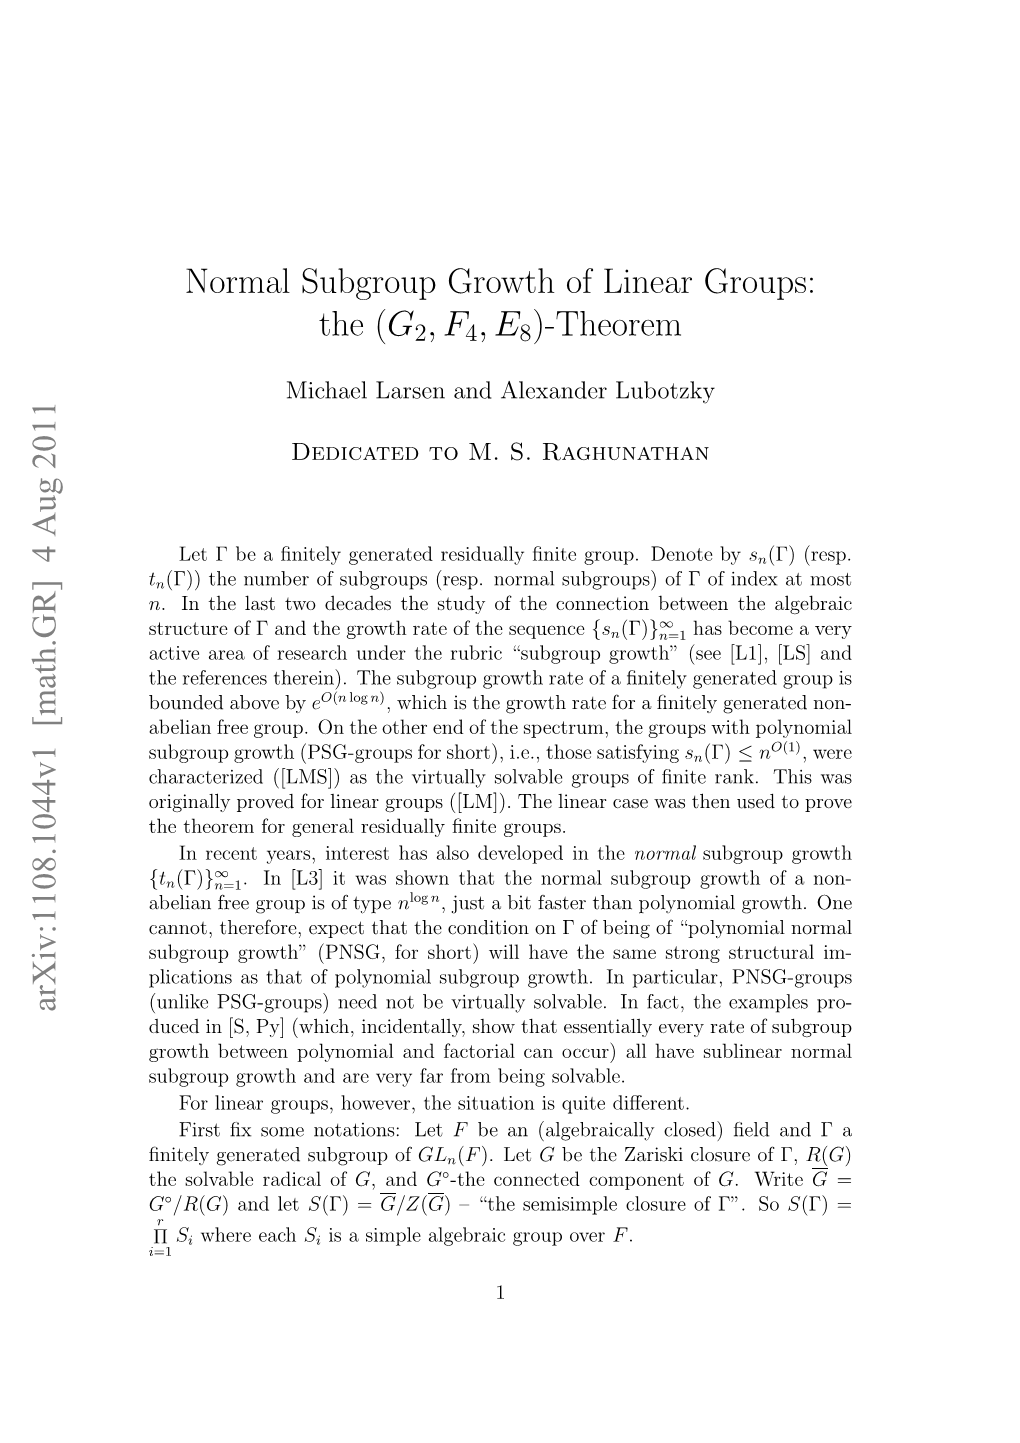 Normal Subgroup Growth of Linear Groups: the (G2; F4; E8)-Theorem